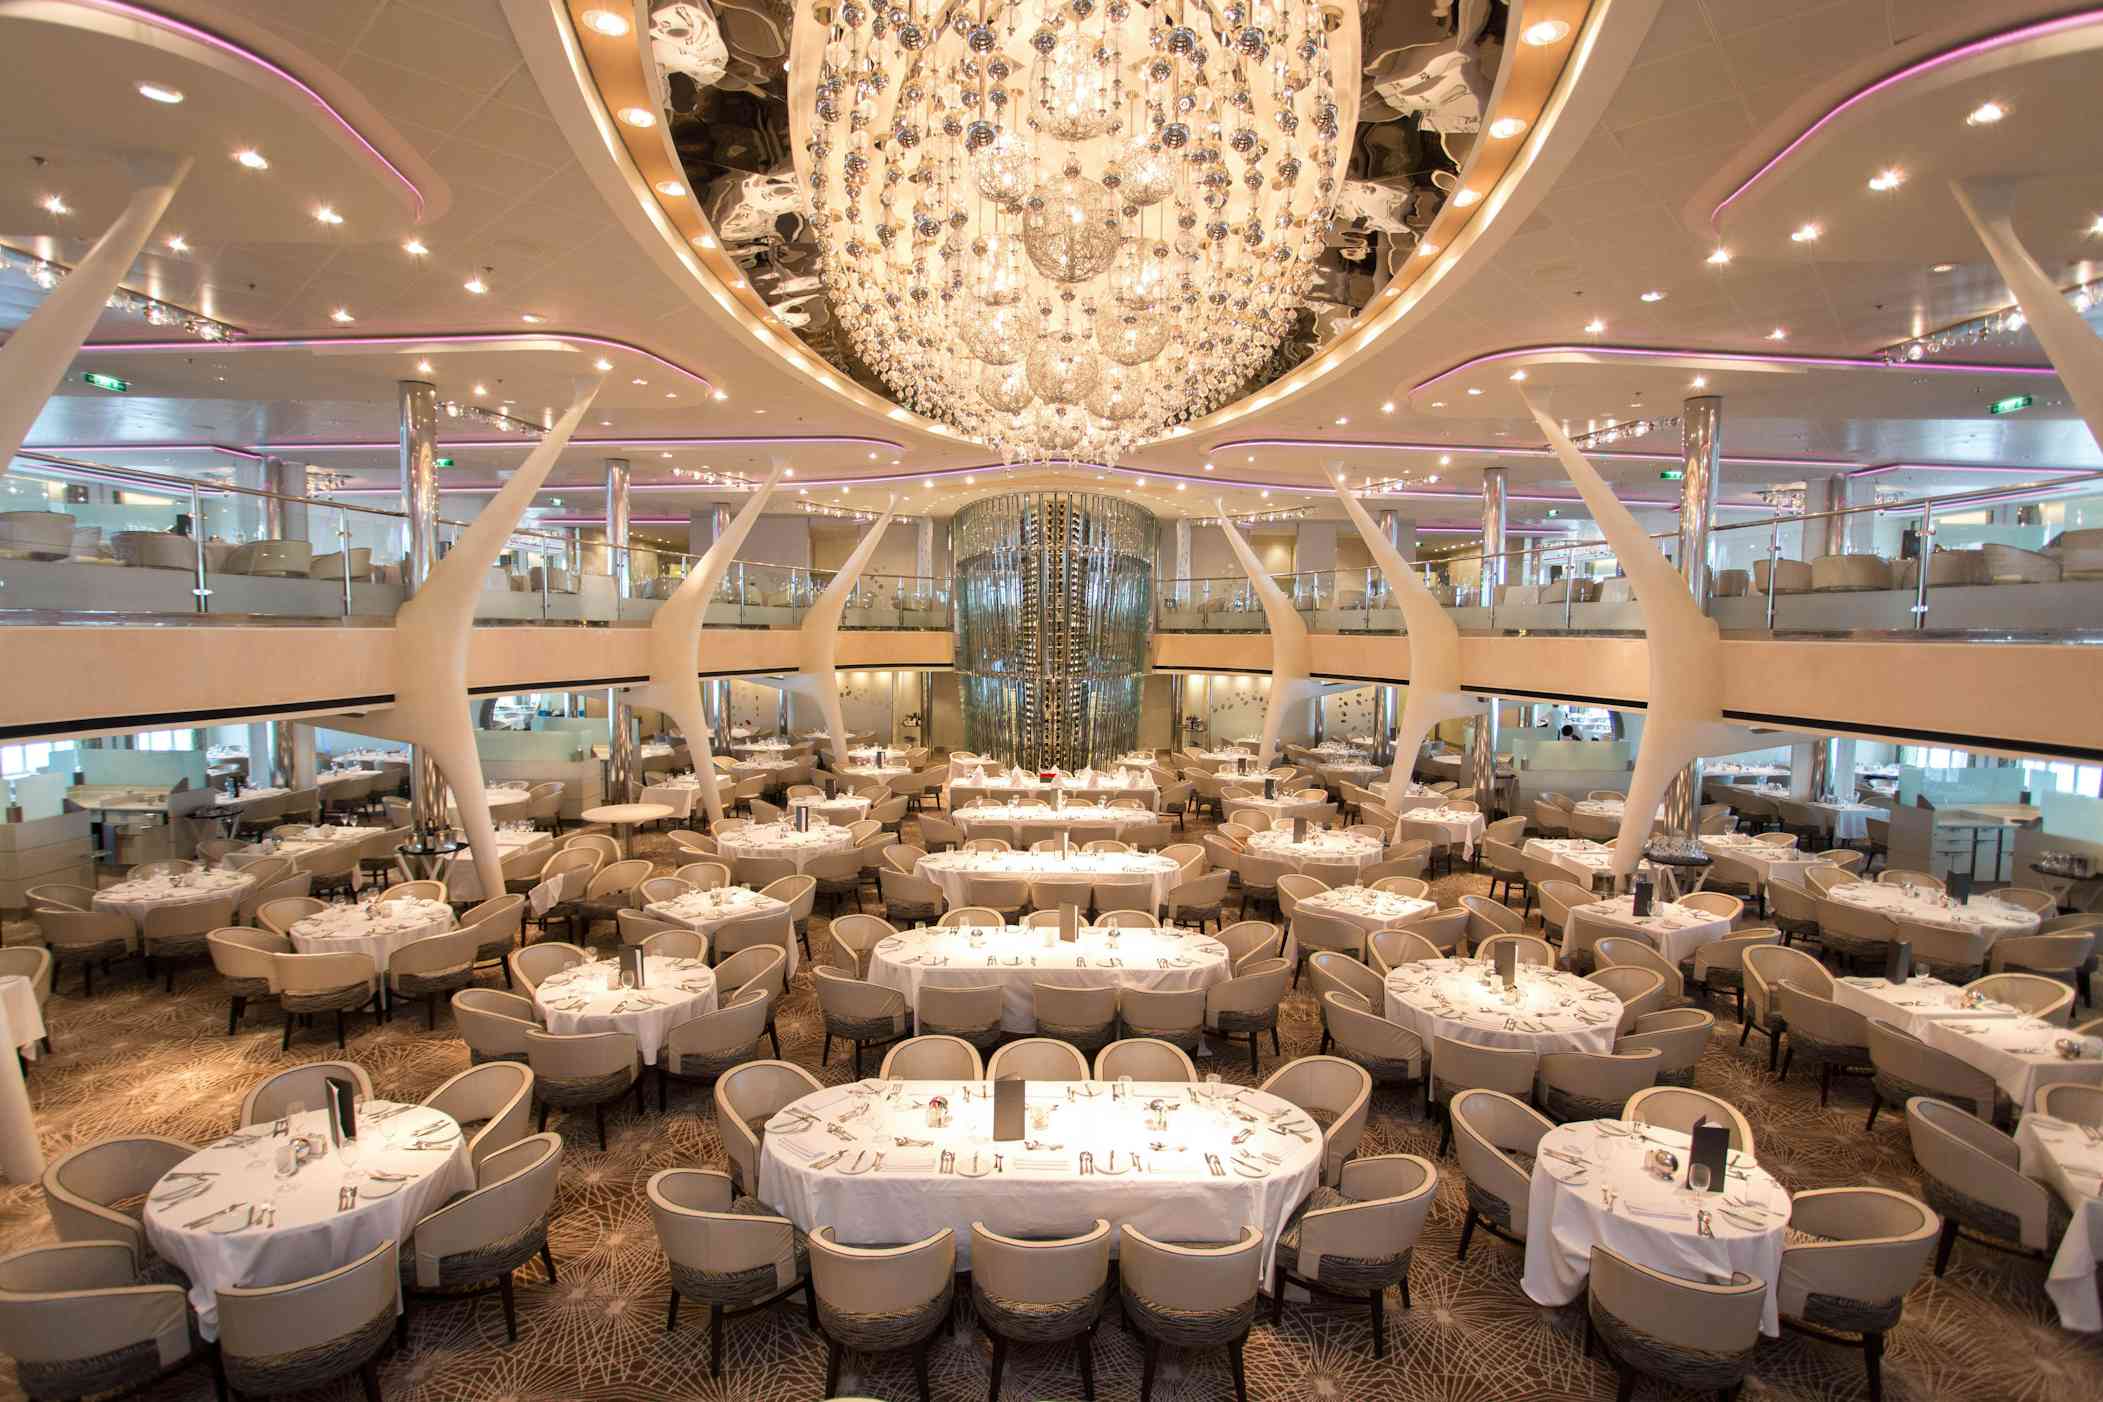 7 Tips for Eating and Dining on Cruises